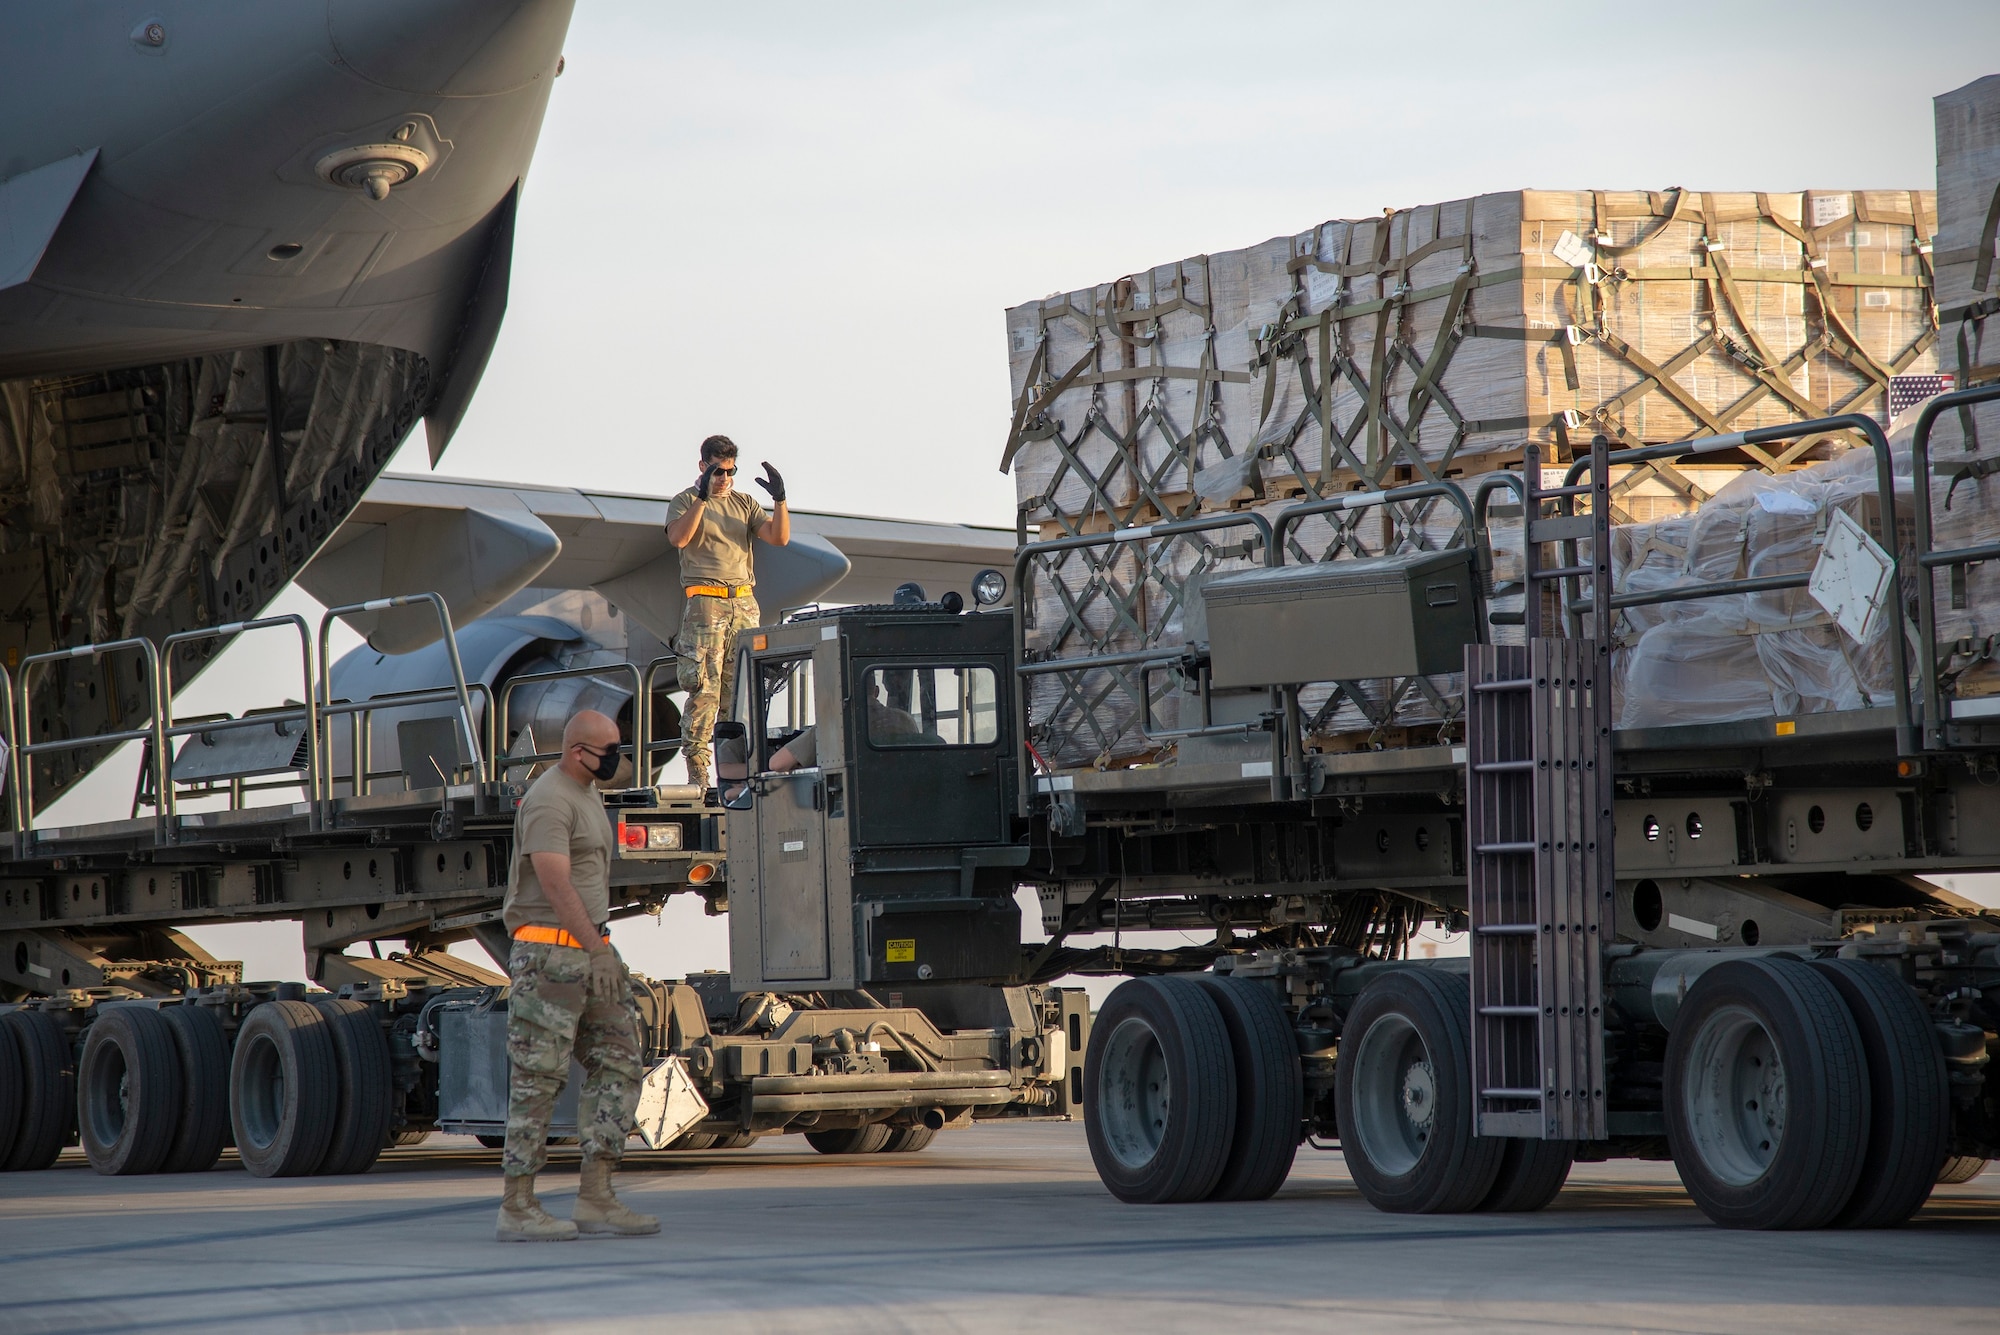 U.S. Air Force Airmen load humanitarian aid supplies a U.S. Air Force C-17 Globemaster III at Al Udeid Air Base, Qatar, Aug. 6, 2020, bound for Beirut, Lebanon. U.S. Central Command is coordinating with the Lebanese Armed Forces and U.S. Embassy-Beirut to transport critical supplies as quickly as possible to support the needs of the Lebanese people. (U.S. Air Force photo by Staff Sgt. Heather Fejerang)